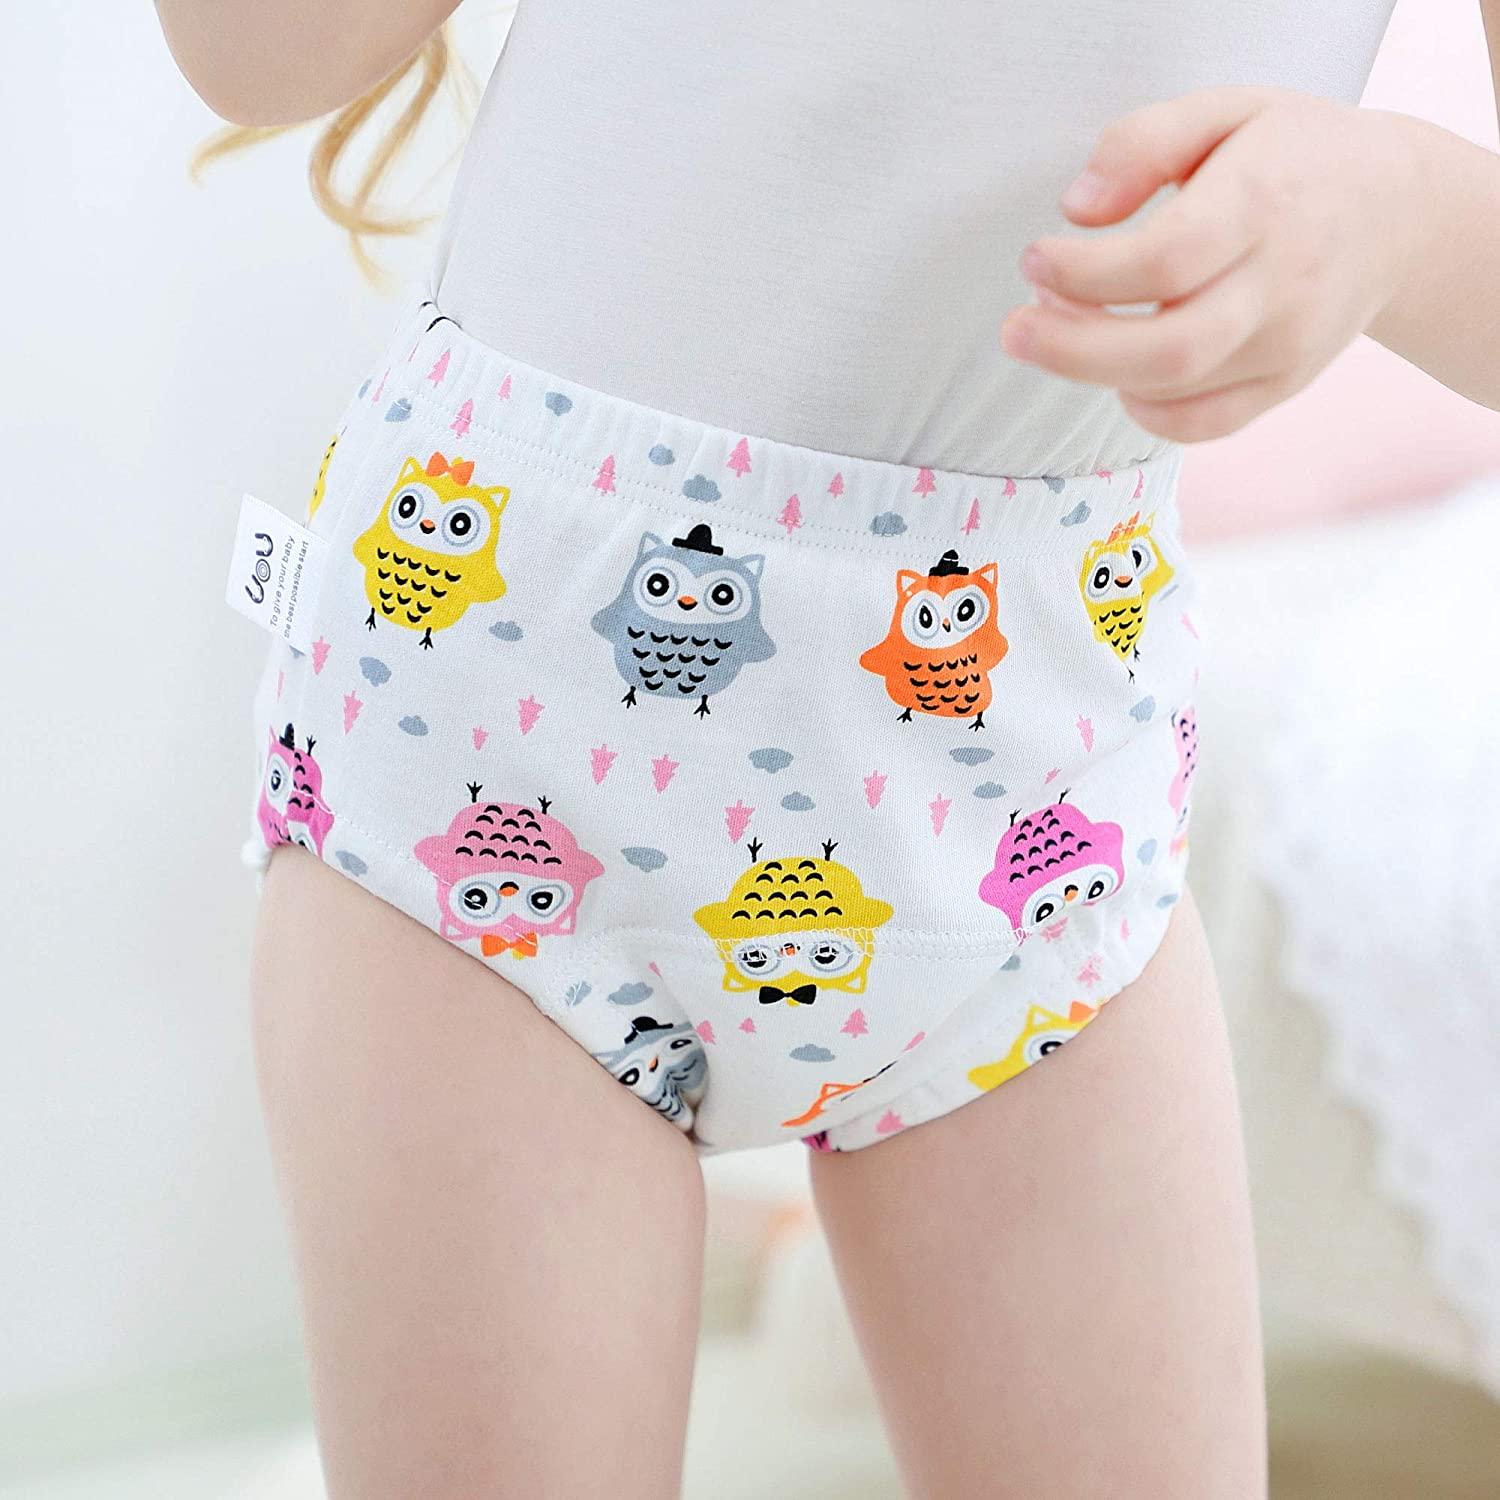 Cotton Training Pants 4 Pack Padded Toddler Potty Training Underwear for  Boys -3T : Amazon.in: Baby Products